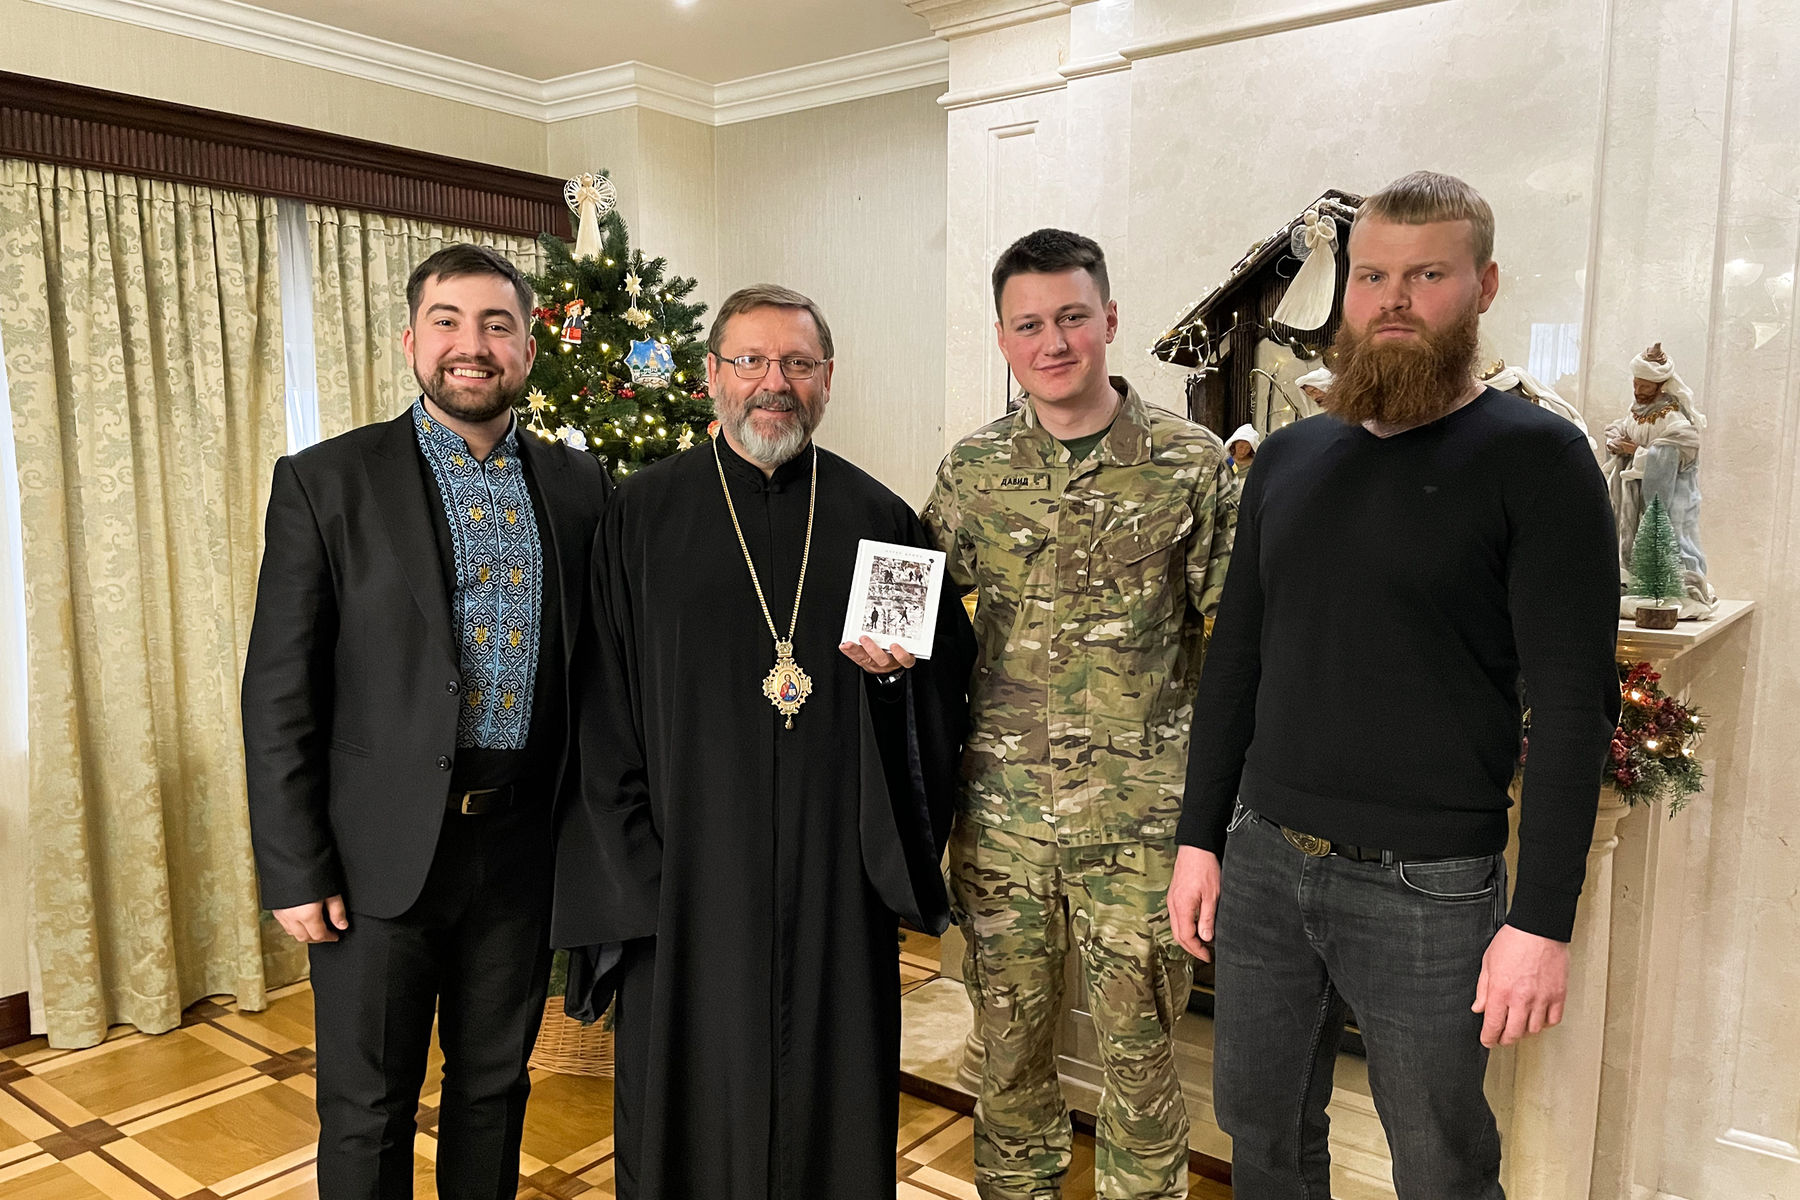  Poet and Military Man ‘David’ Was Among the First Carolers for His Beatitude Sviatoslav, Accompanied by Friends